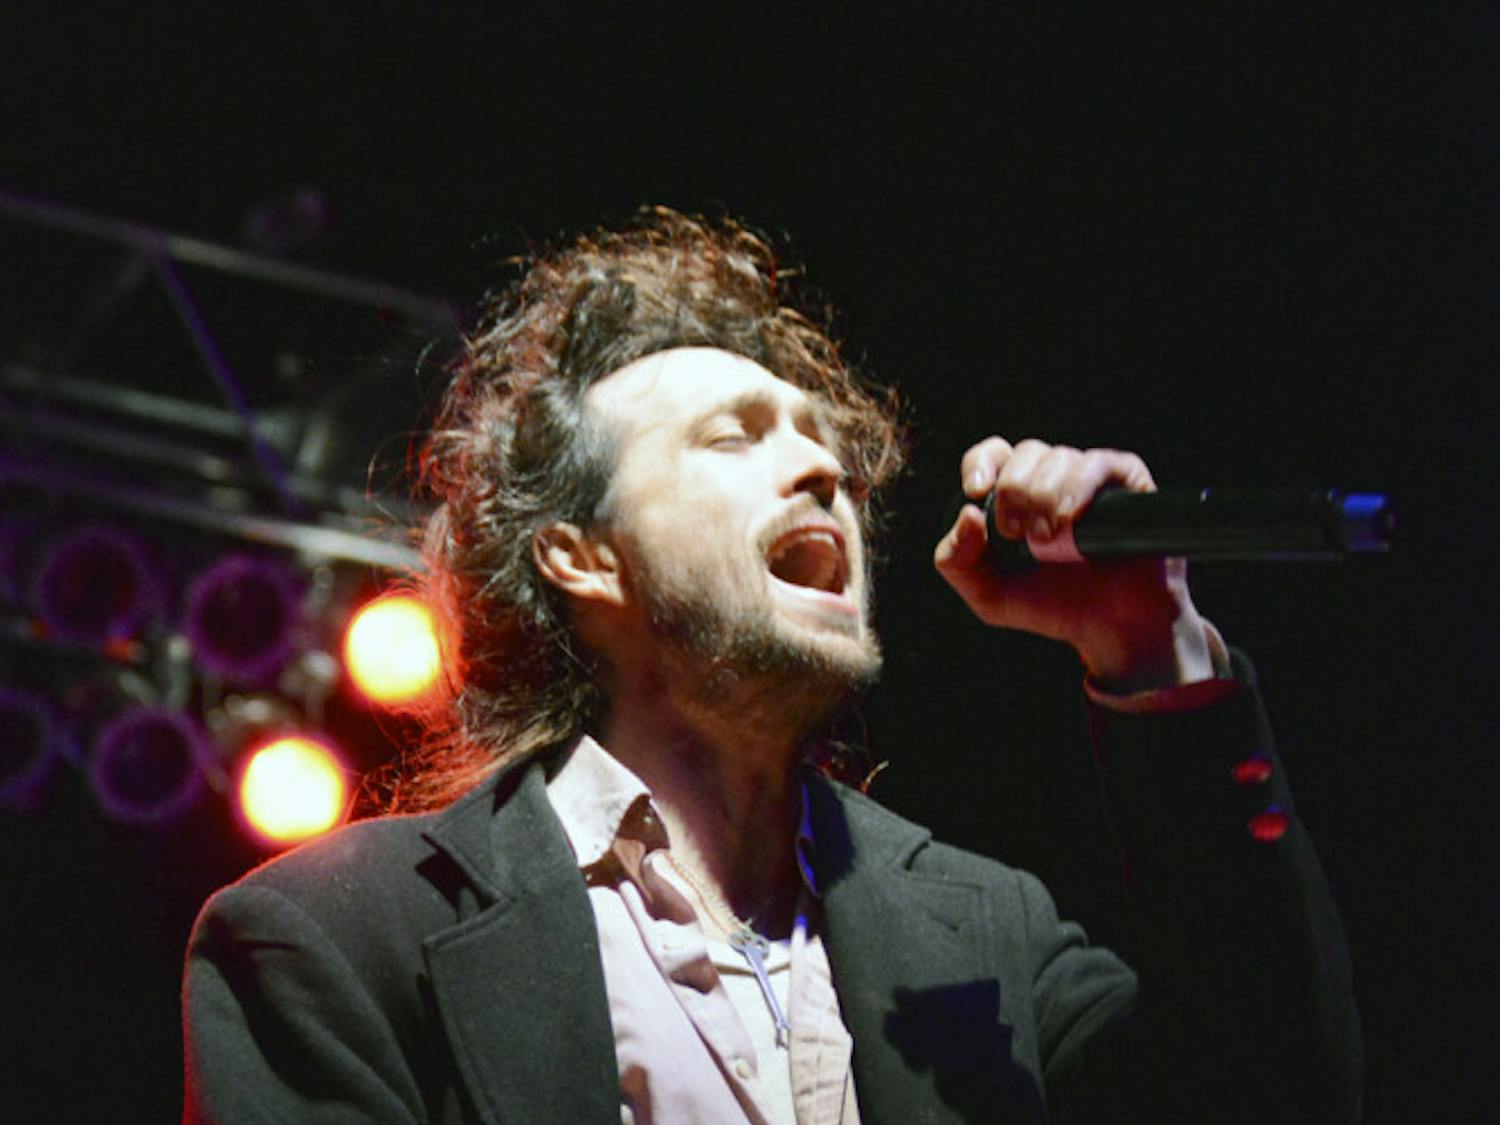 Alex Ebert, the 36-year-old lead singer of indie folk band Edward Sharpe and the Magnetic Zeros, performs from atop the Flavet Field stage Friday night. Electronic music duo The Knocks opened the concert, which was attended by a large crowd of people despite the evening’s cold temperature.